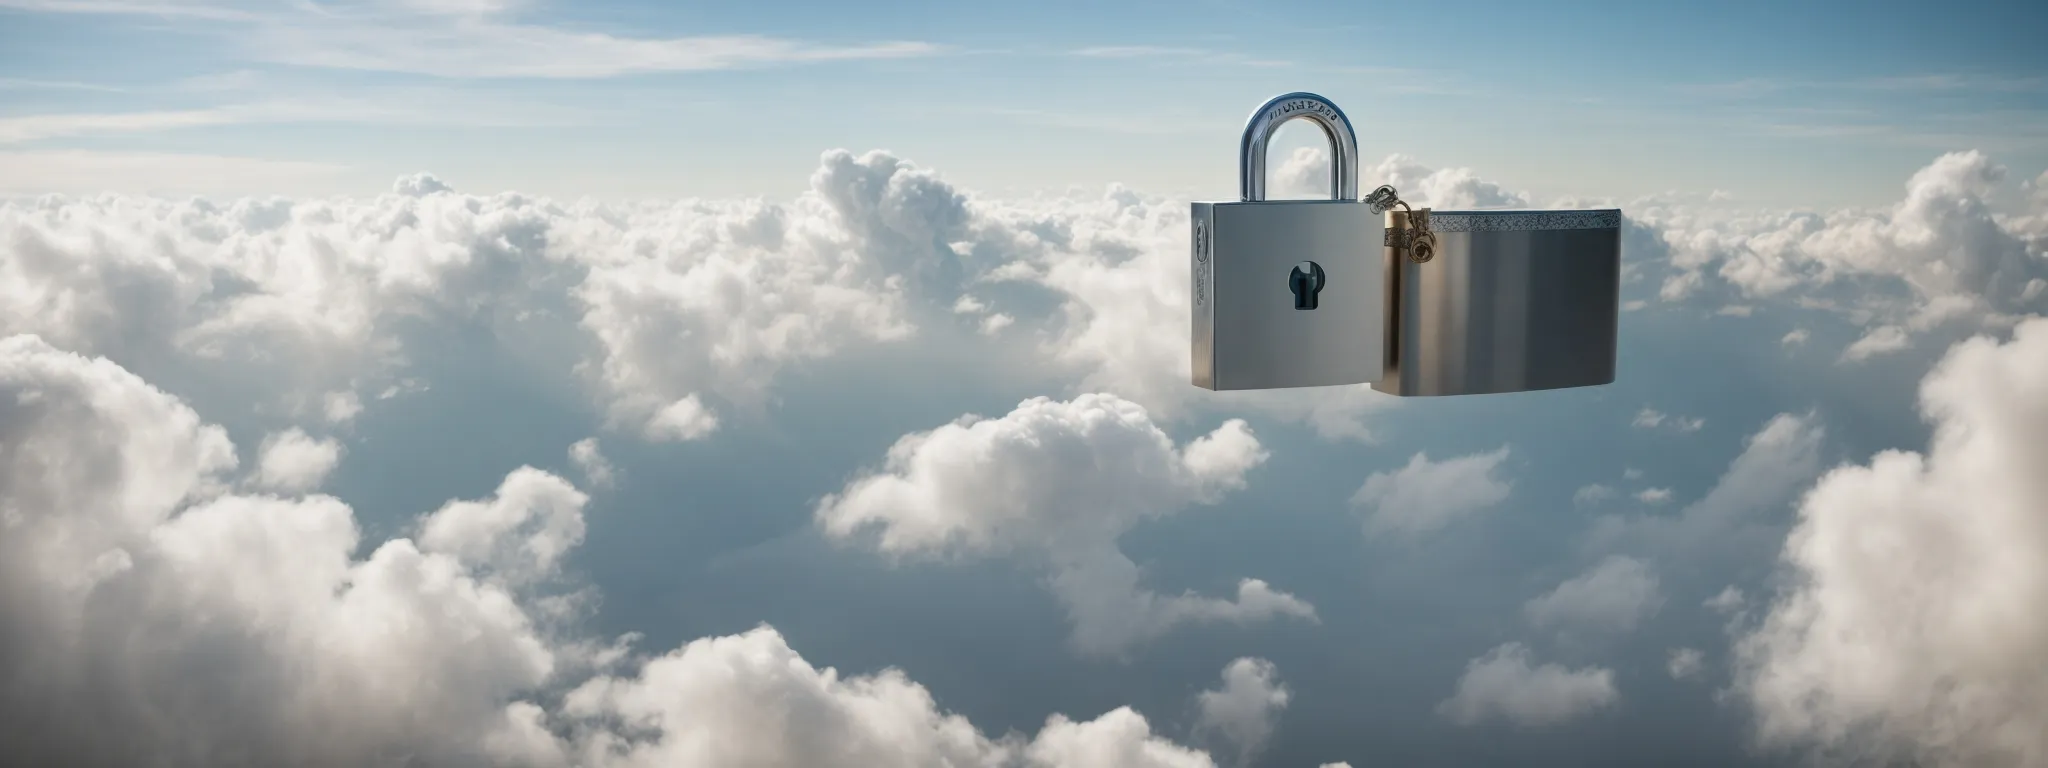 a secure padlock over a cloud symbolizes the enhanced website security promised by cloud hosting services.